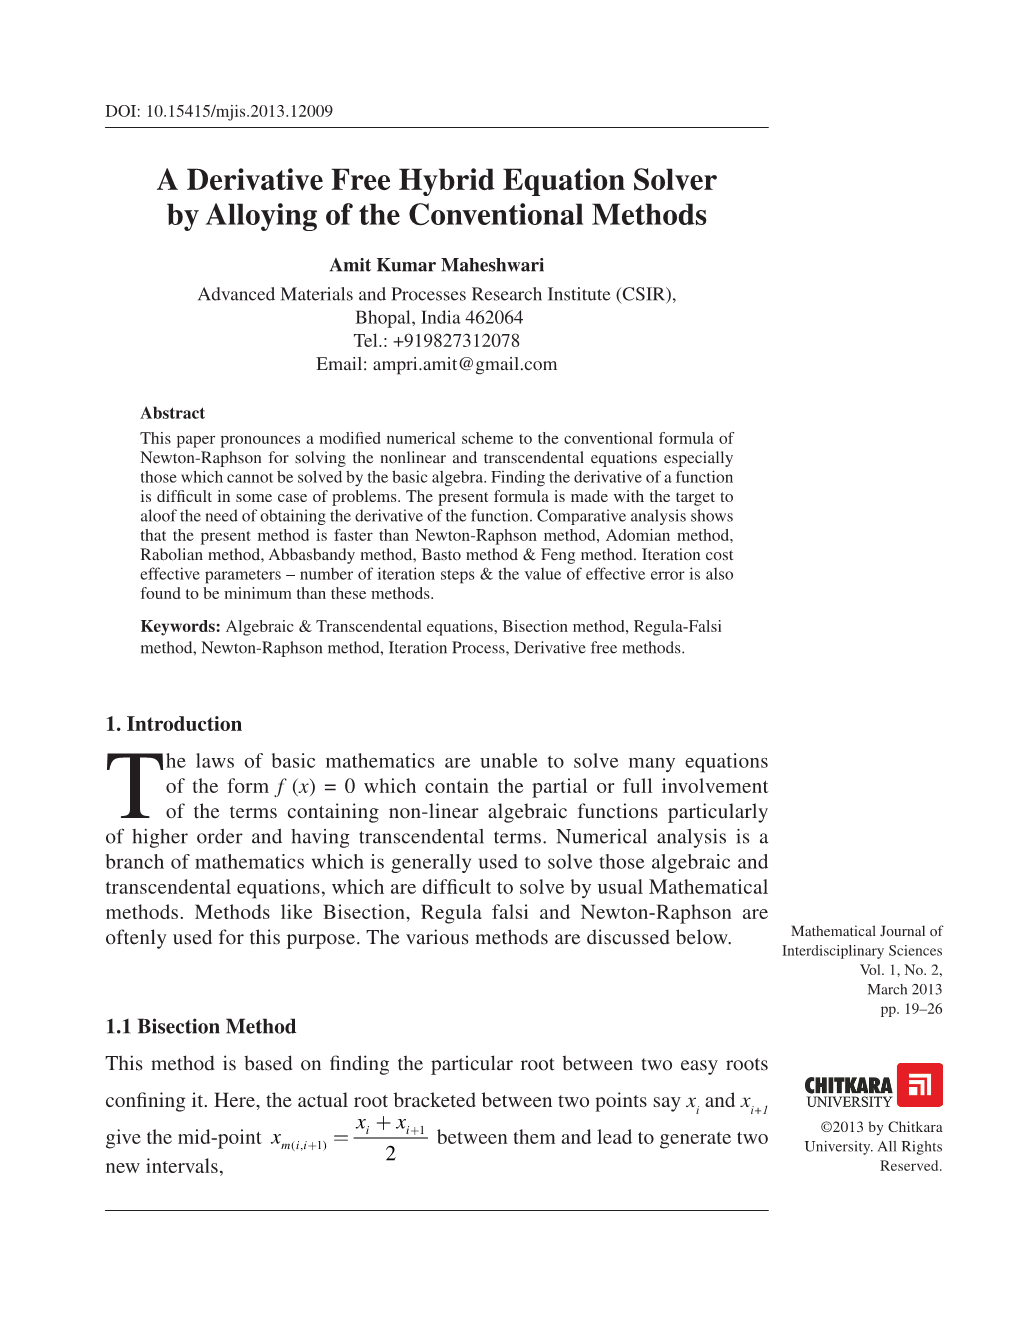 A Derivative Free Hybrid Equation Solver by Alloying of the Conventional Methods